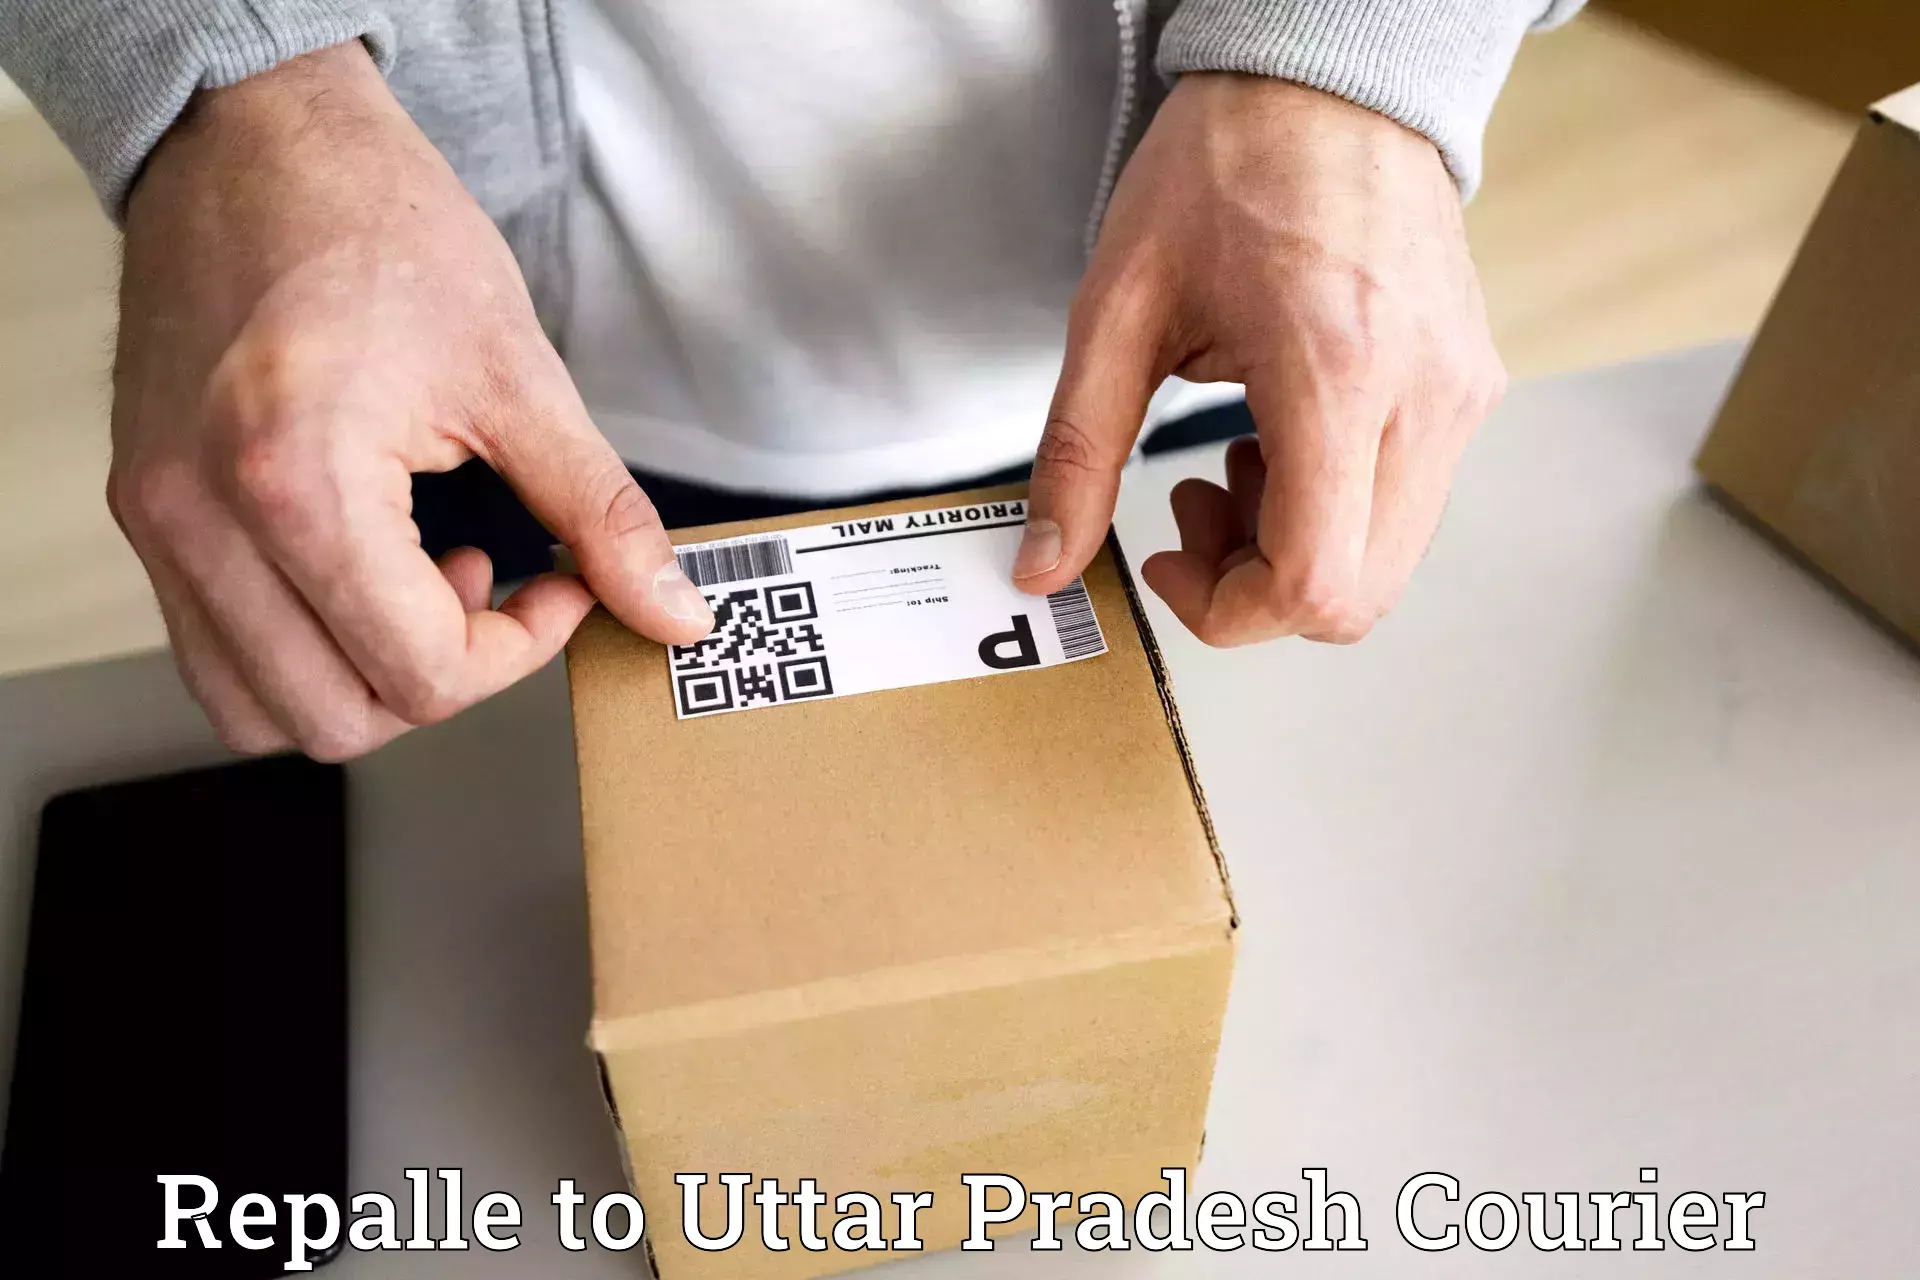 Reliable courier service Repalle to Unnao